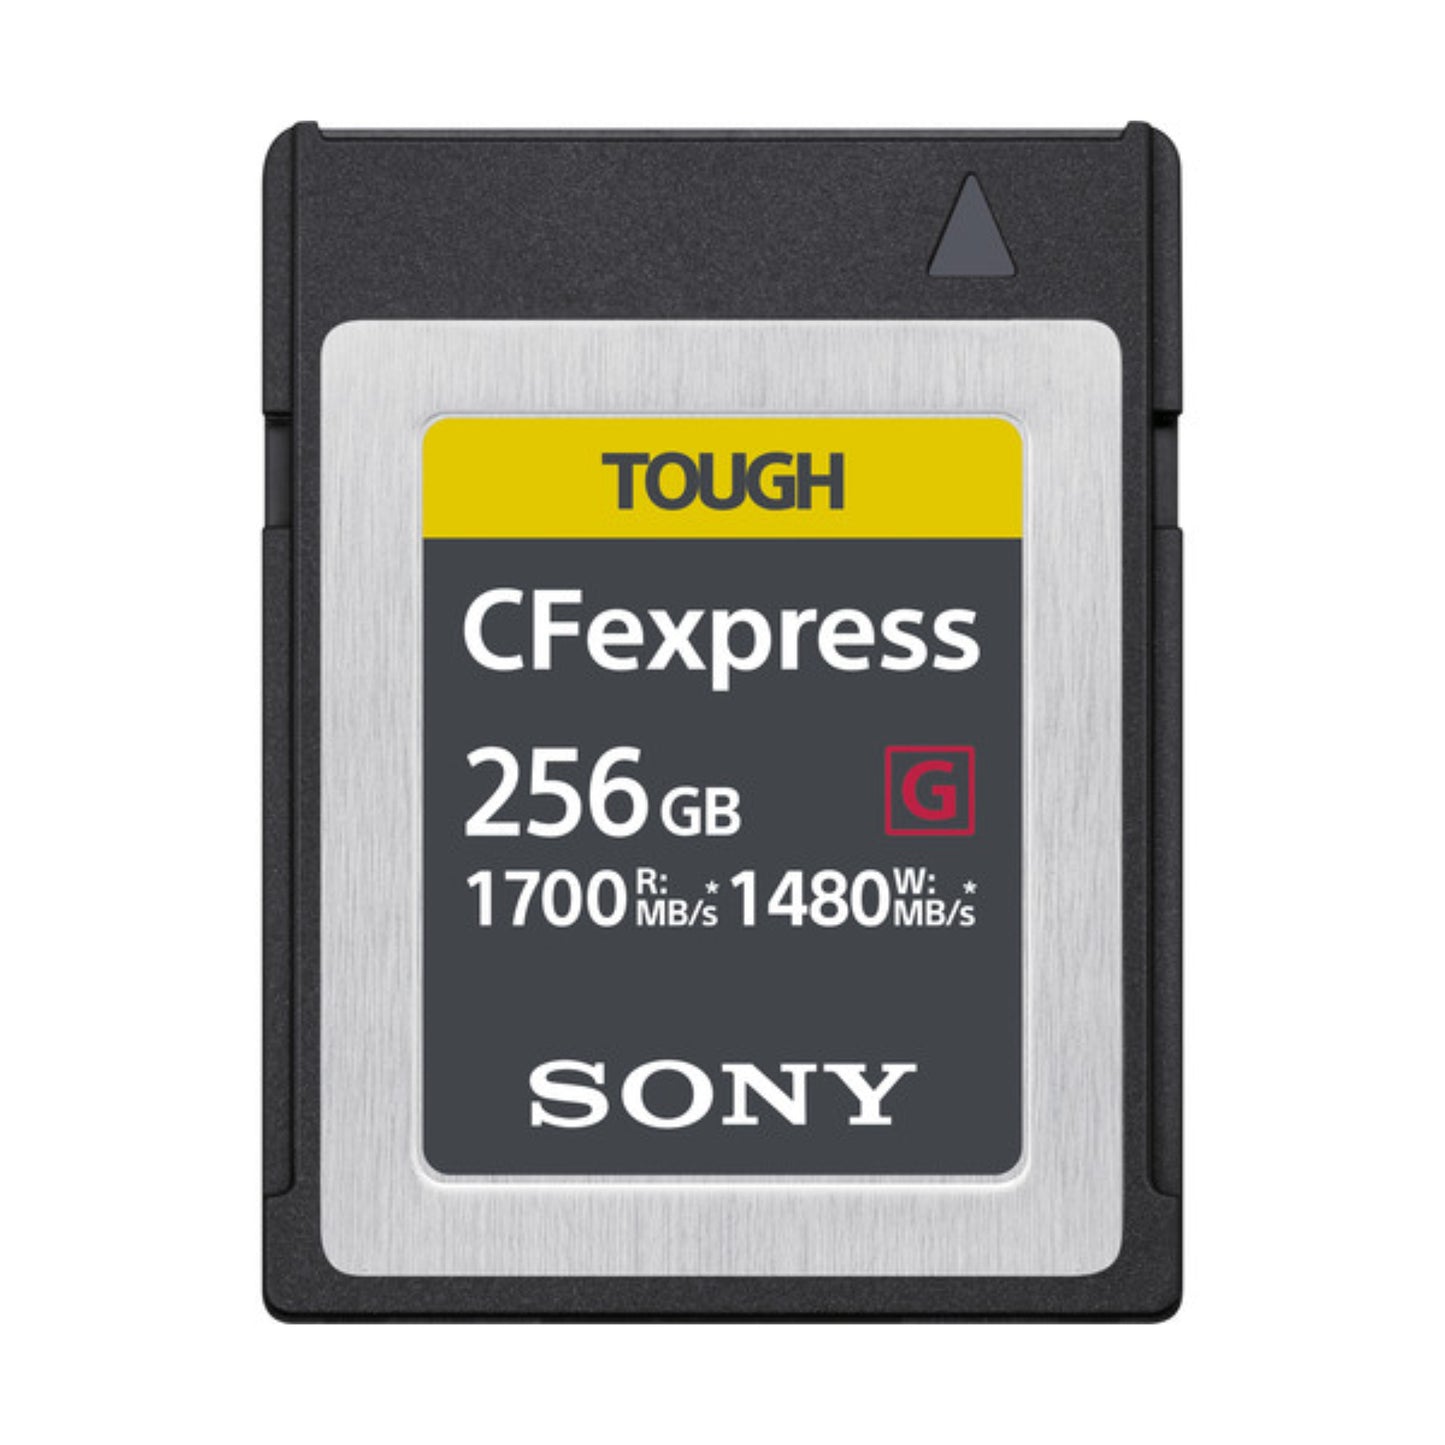 Sony 256GB CFexpress Memory Card for hire